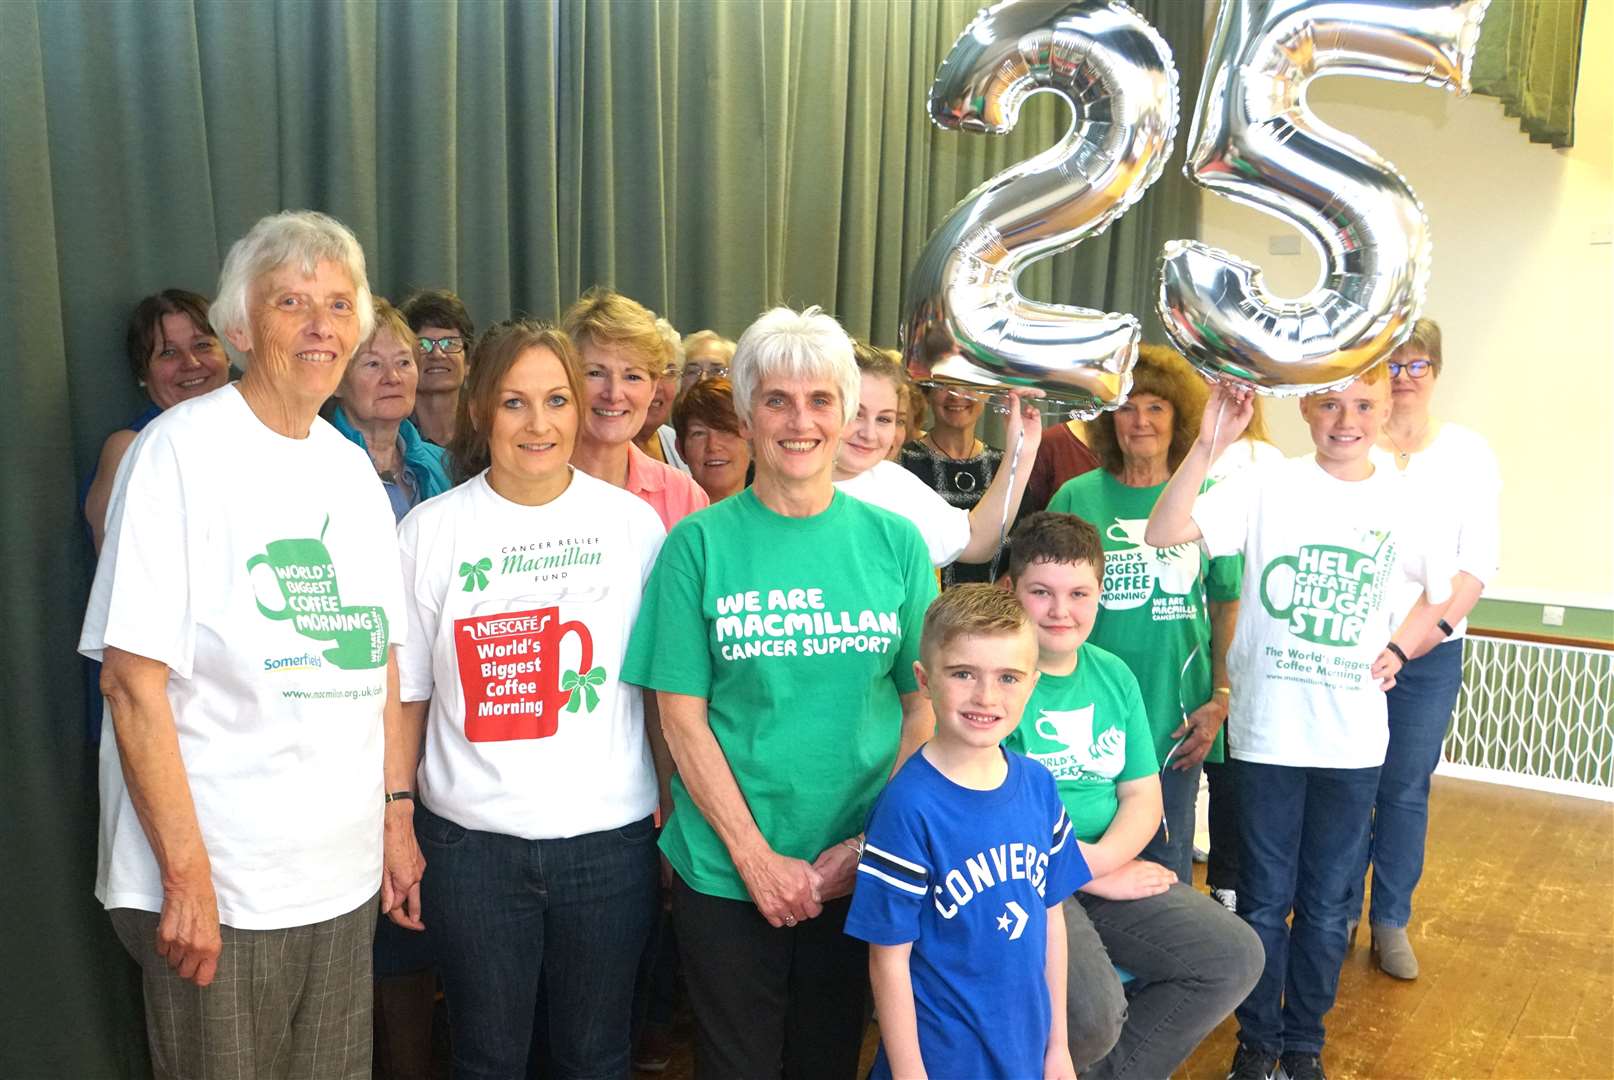 The Macmillan coffee morning volunteers celebrated 25 years of fundraising which has seen over £50,000 raised towards the charity. Dianne Mackay is pictured in the middle wearing the green top. Pictures: DGS